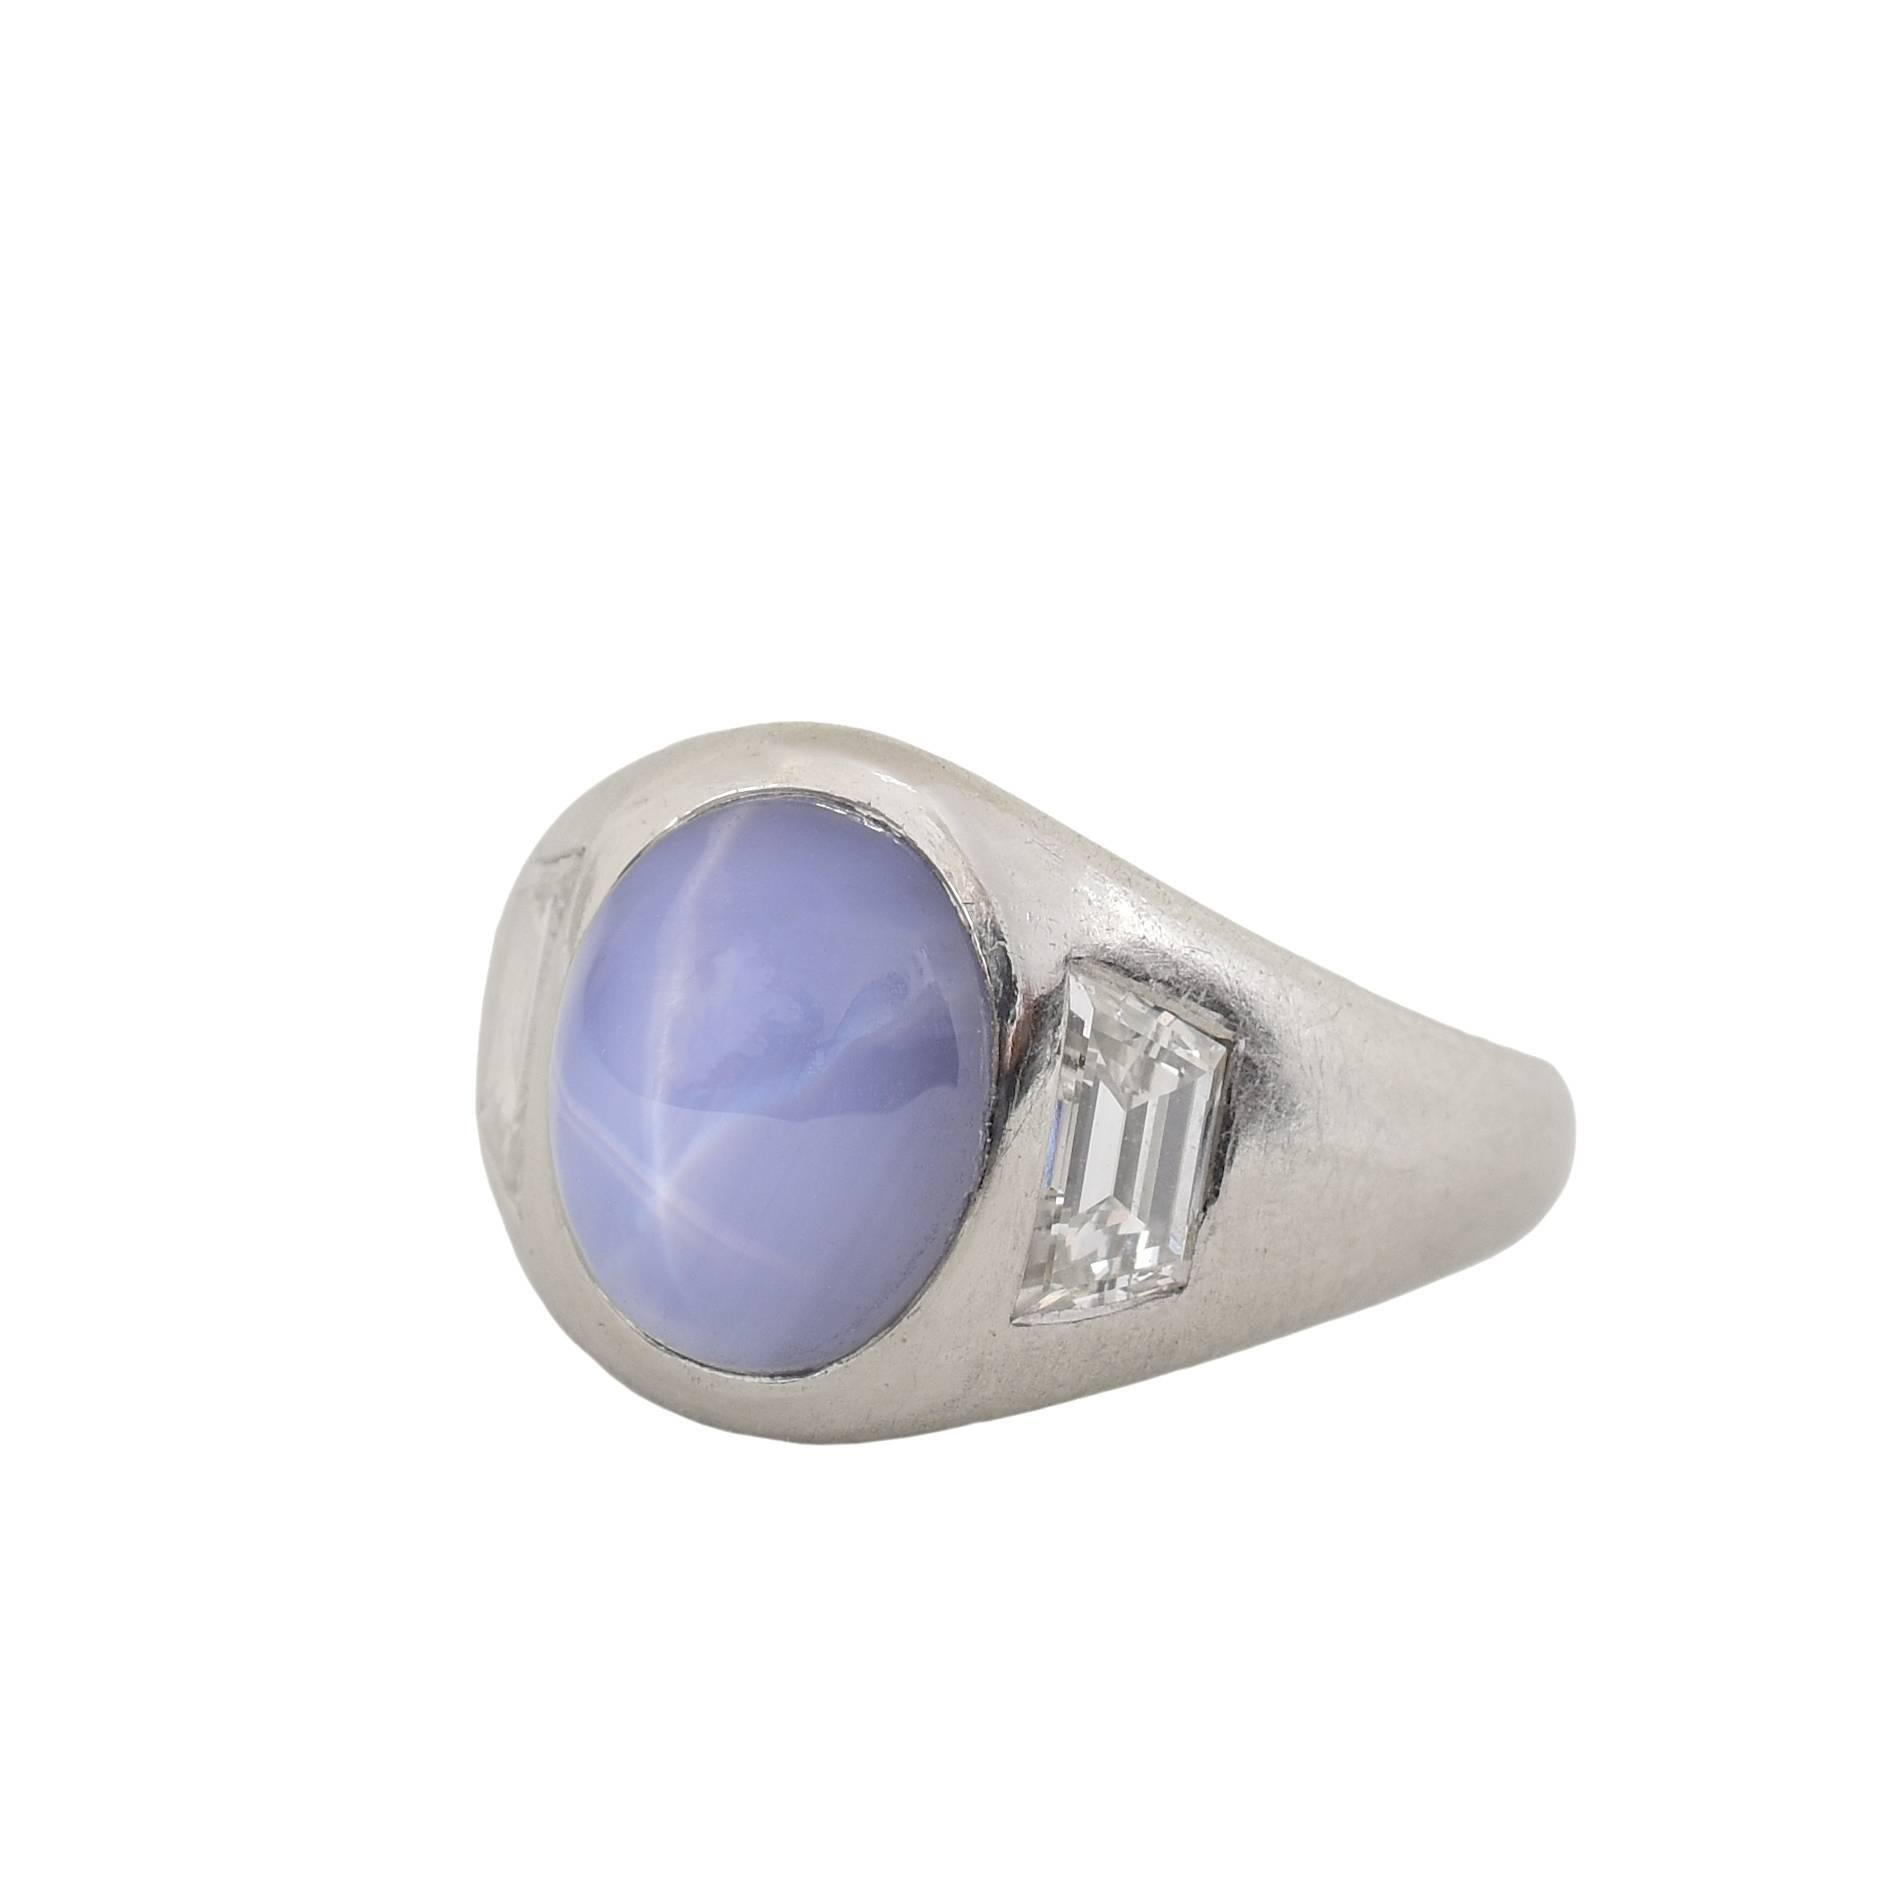 Raymond Yard ring with a star sapphire center and two diamond accents. 